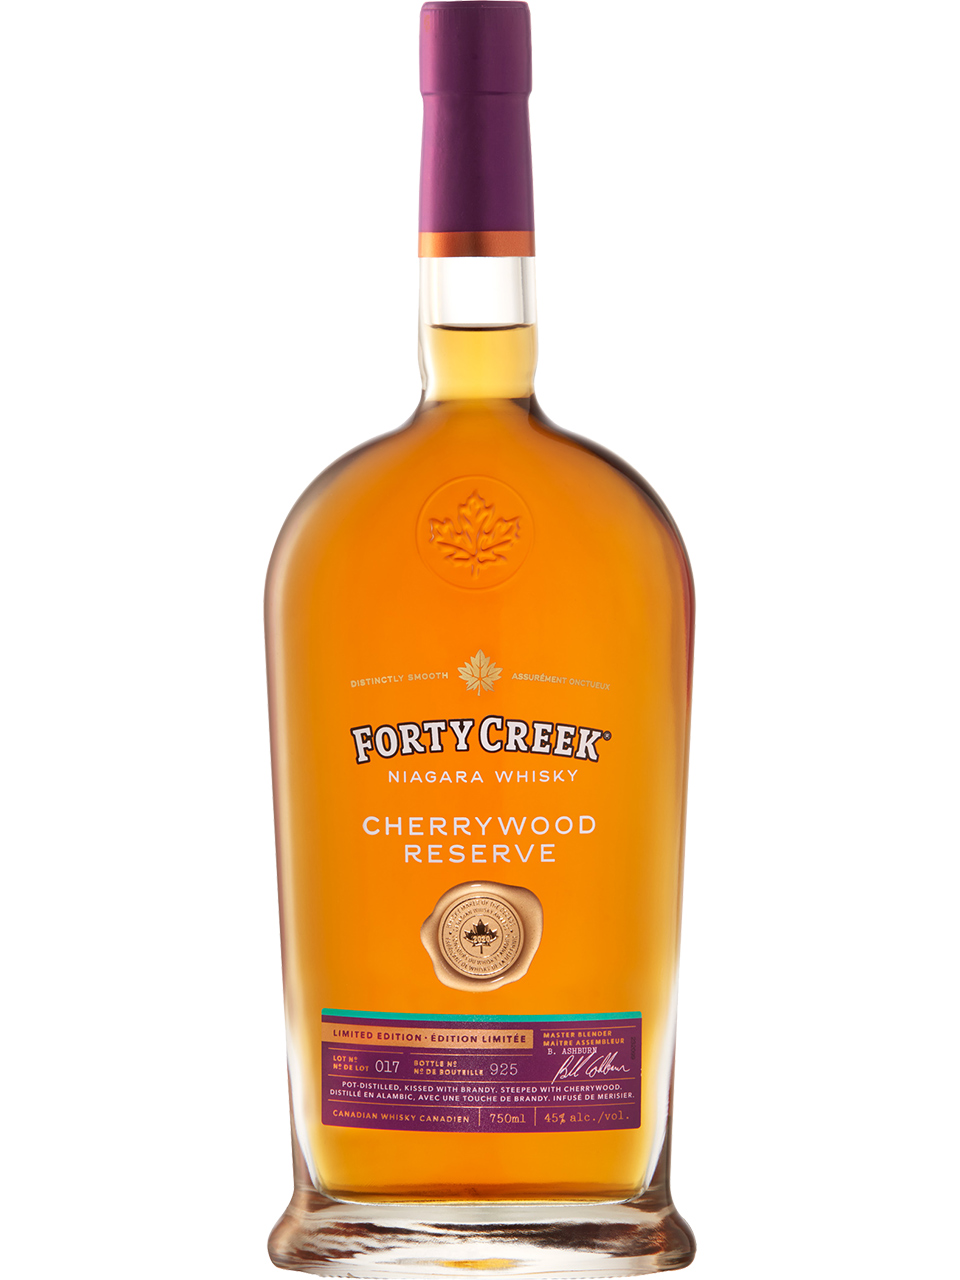 Forty Creek Cherrywood Reserve Whisky